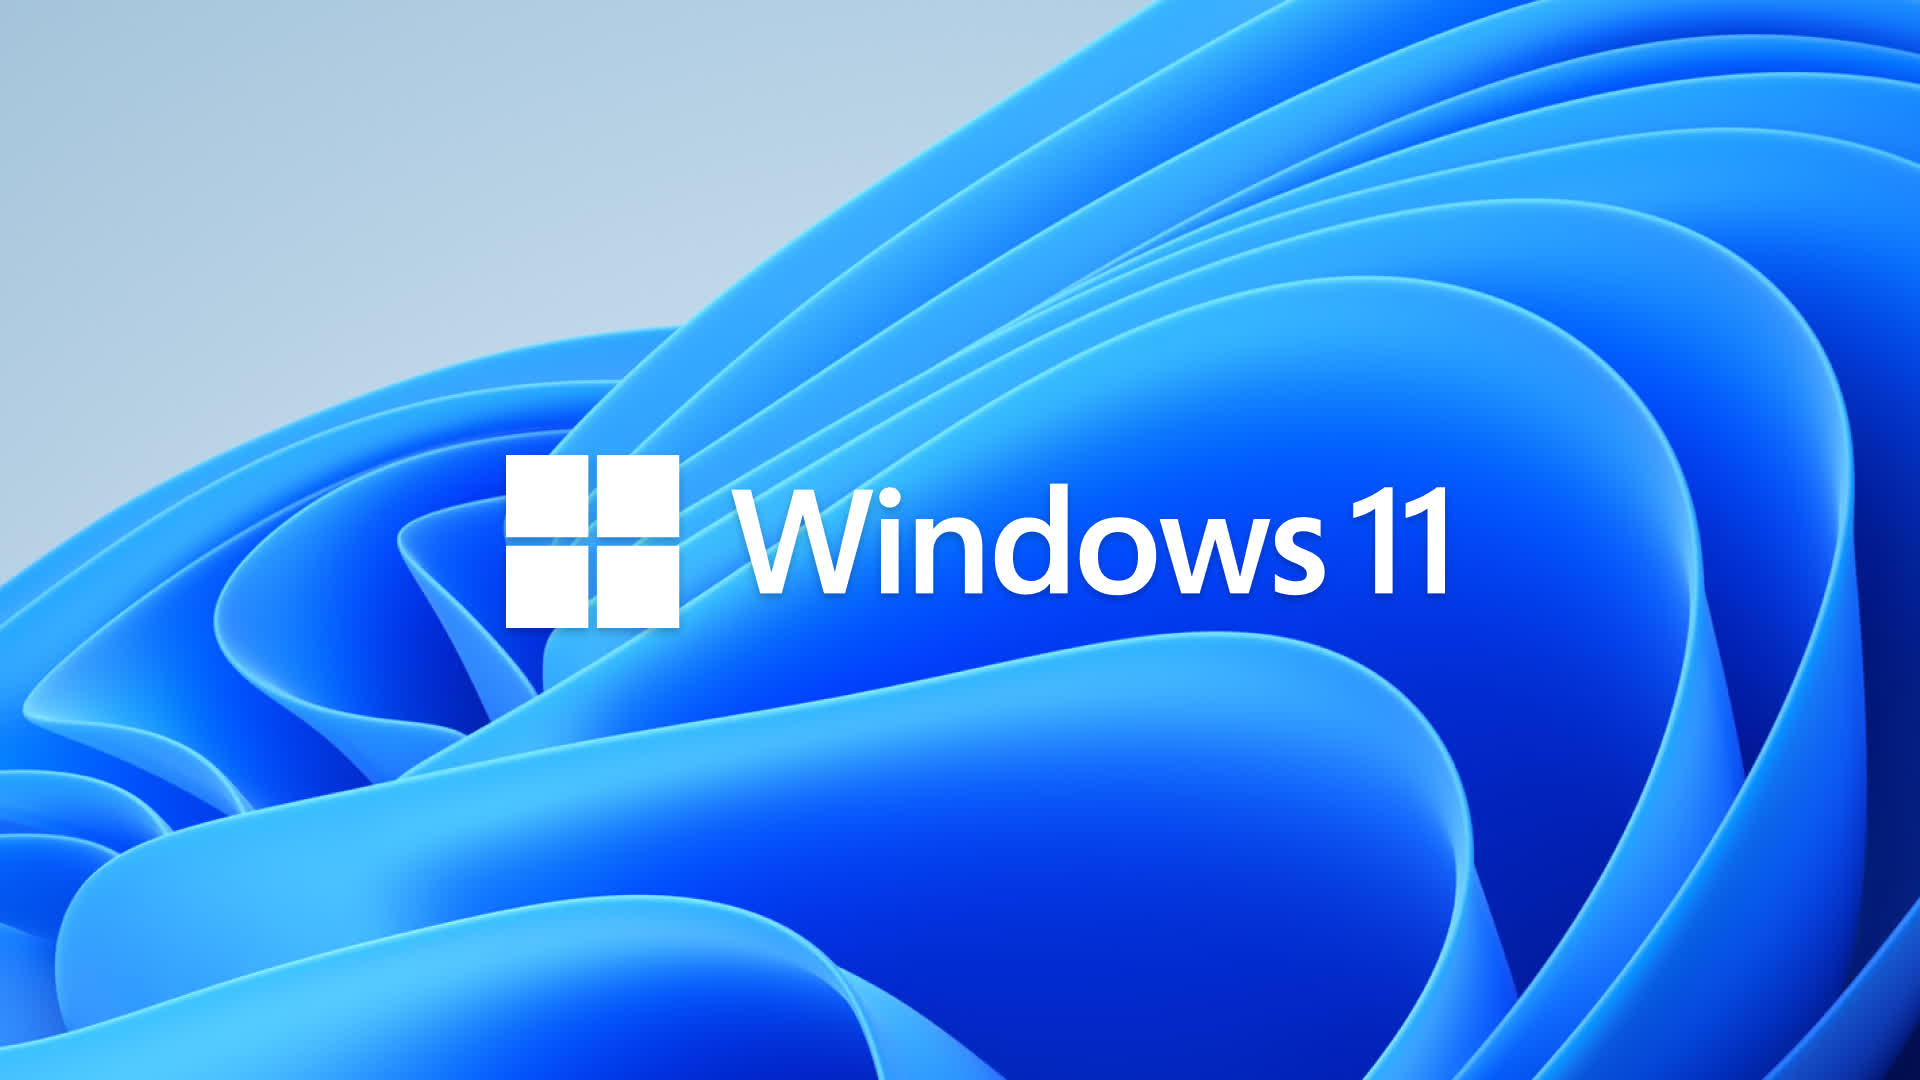 Over 60% of PC users don't know about Windows 11